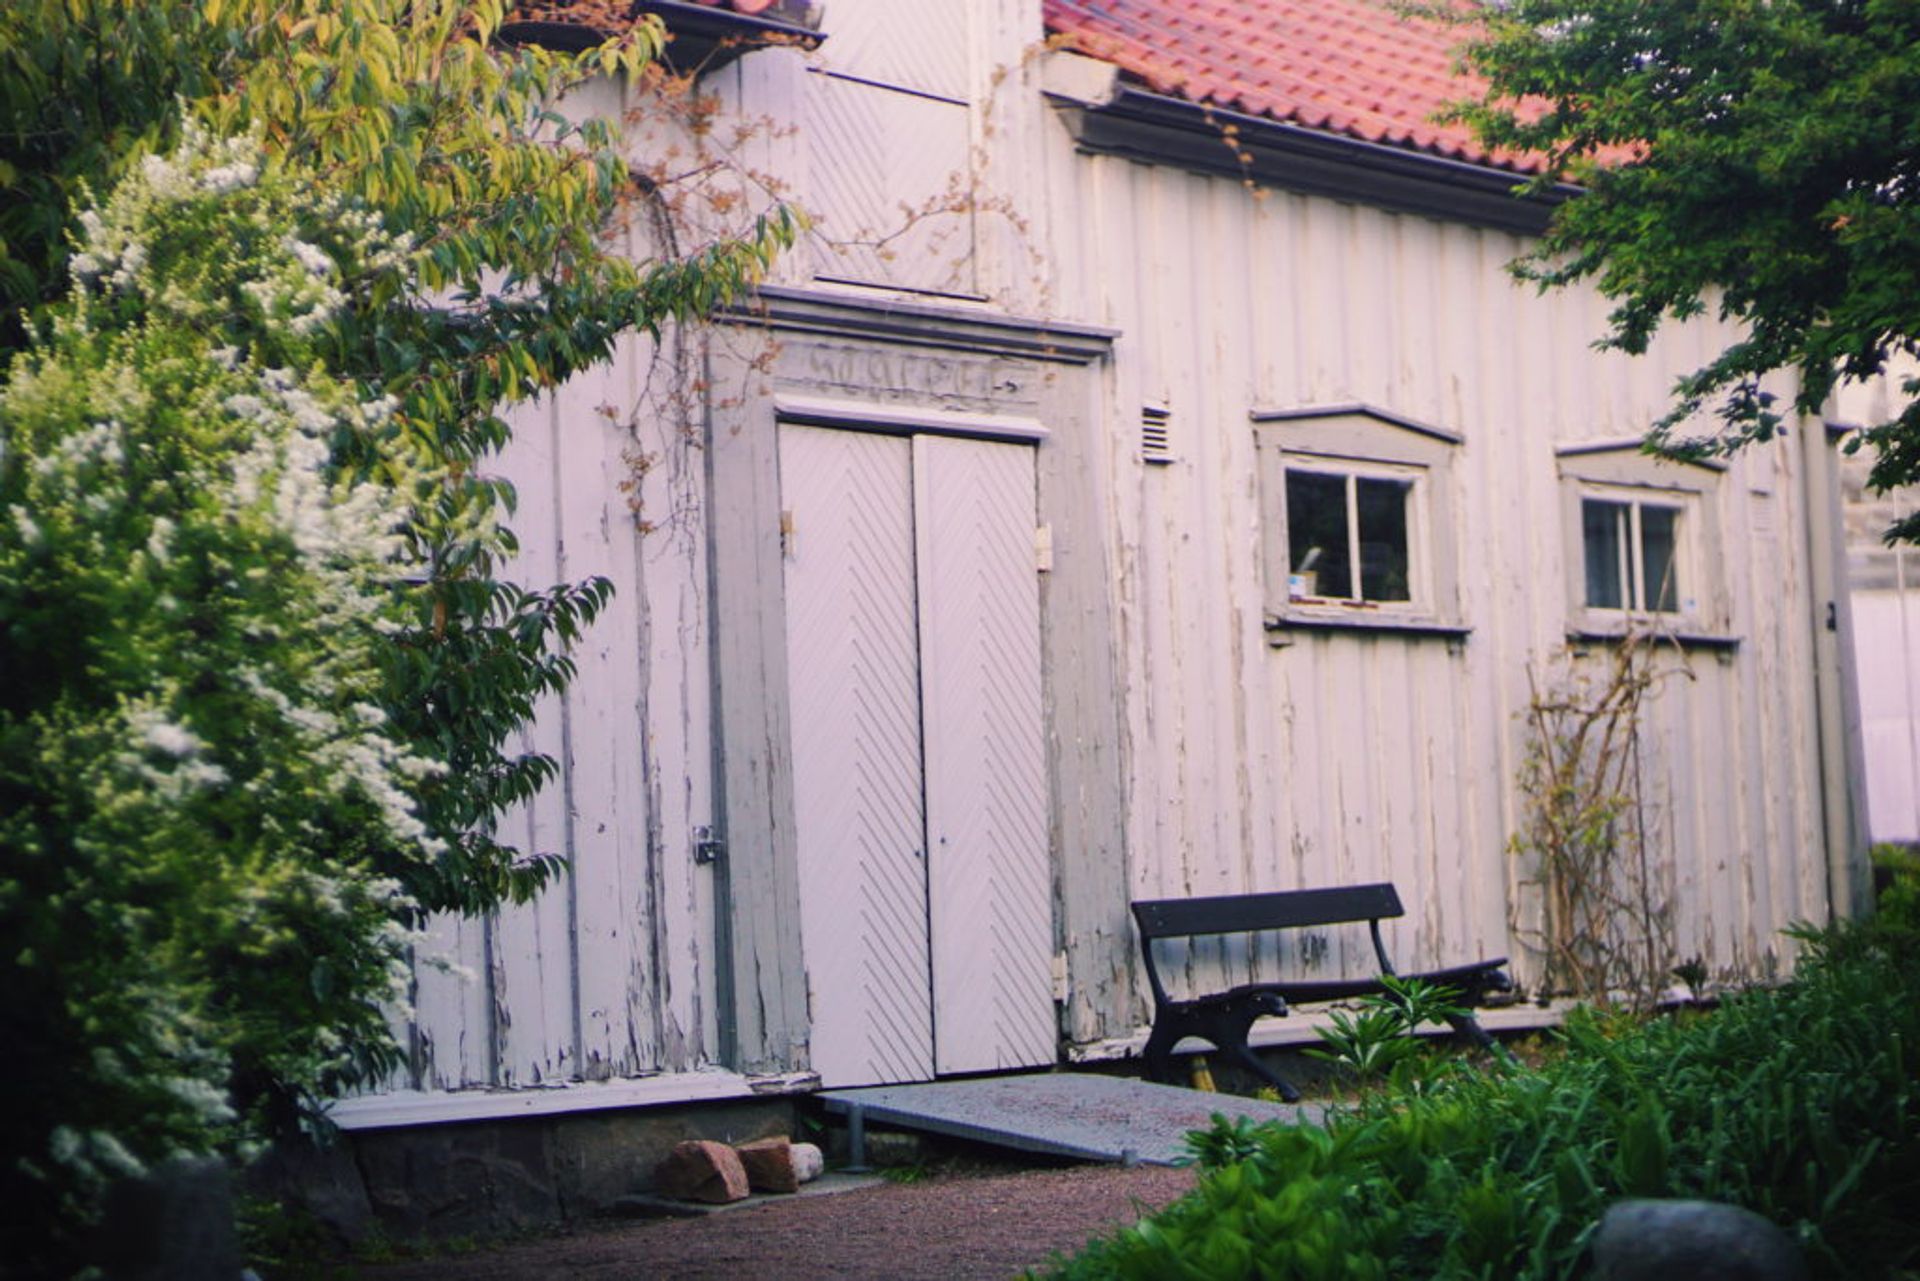 A white, wooden building in the park.